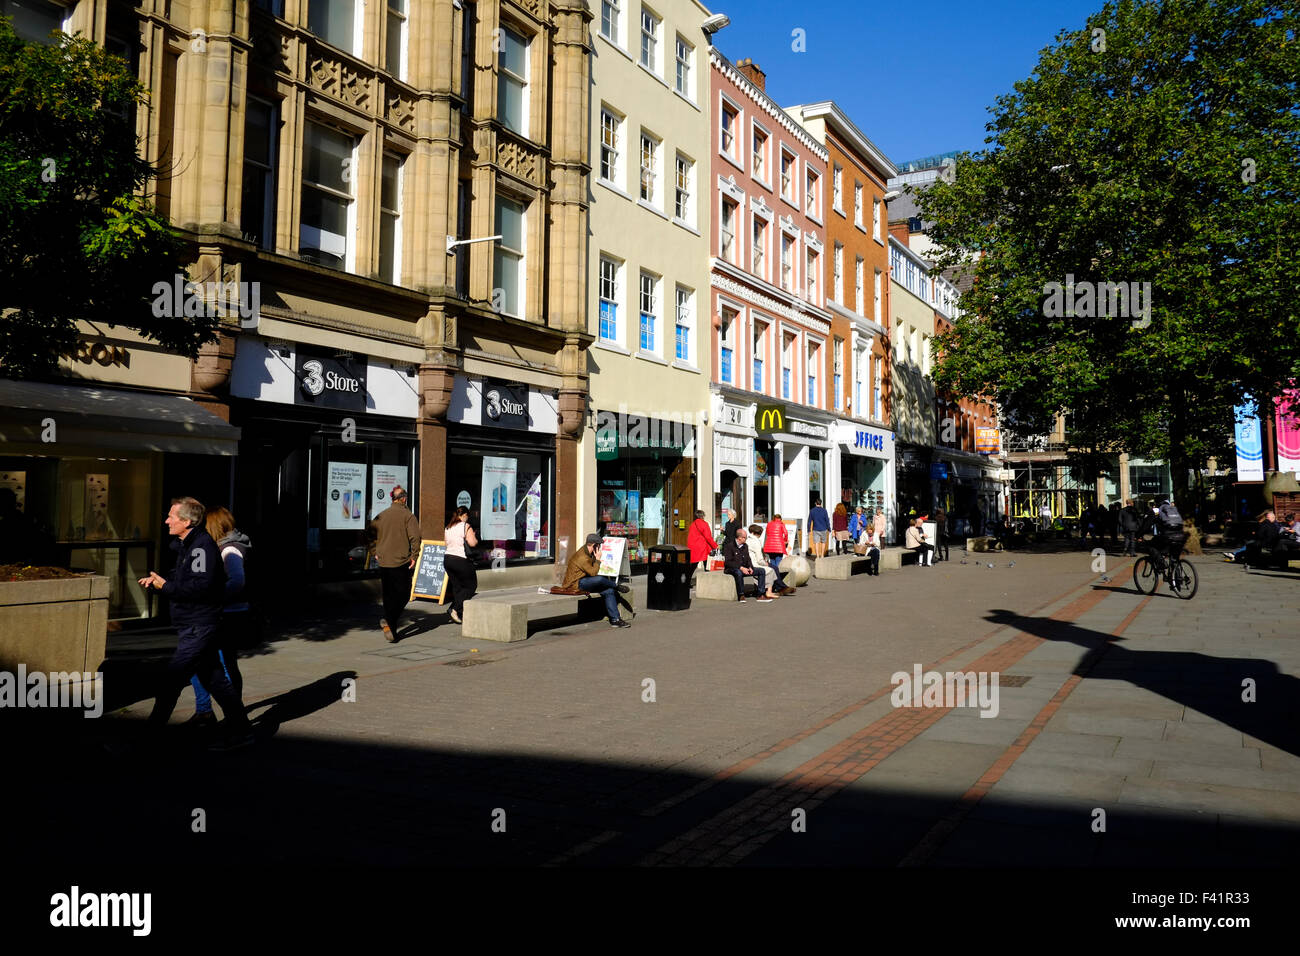 St. Anne's Square, Manchester, UK Stock Photo